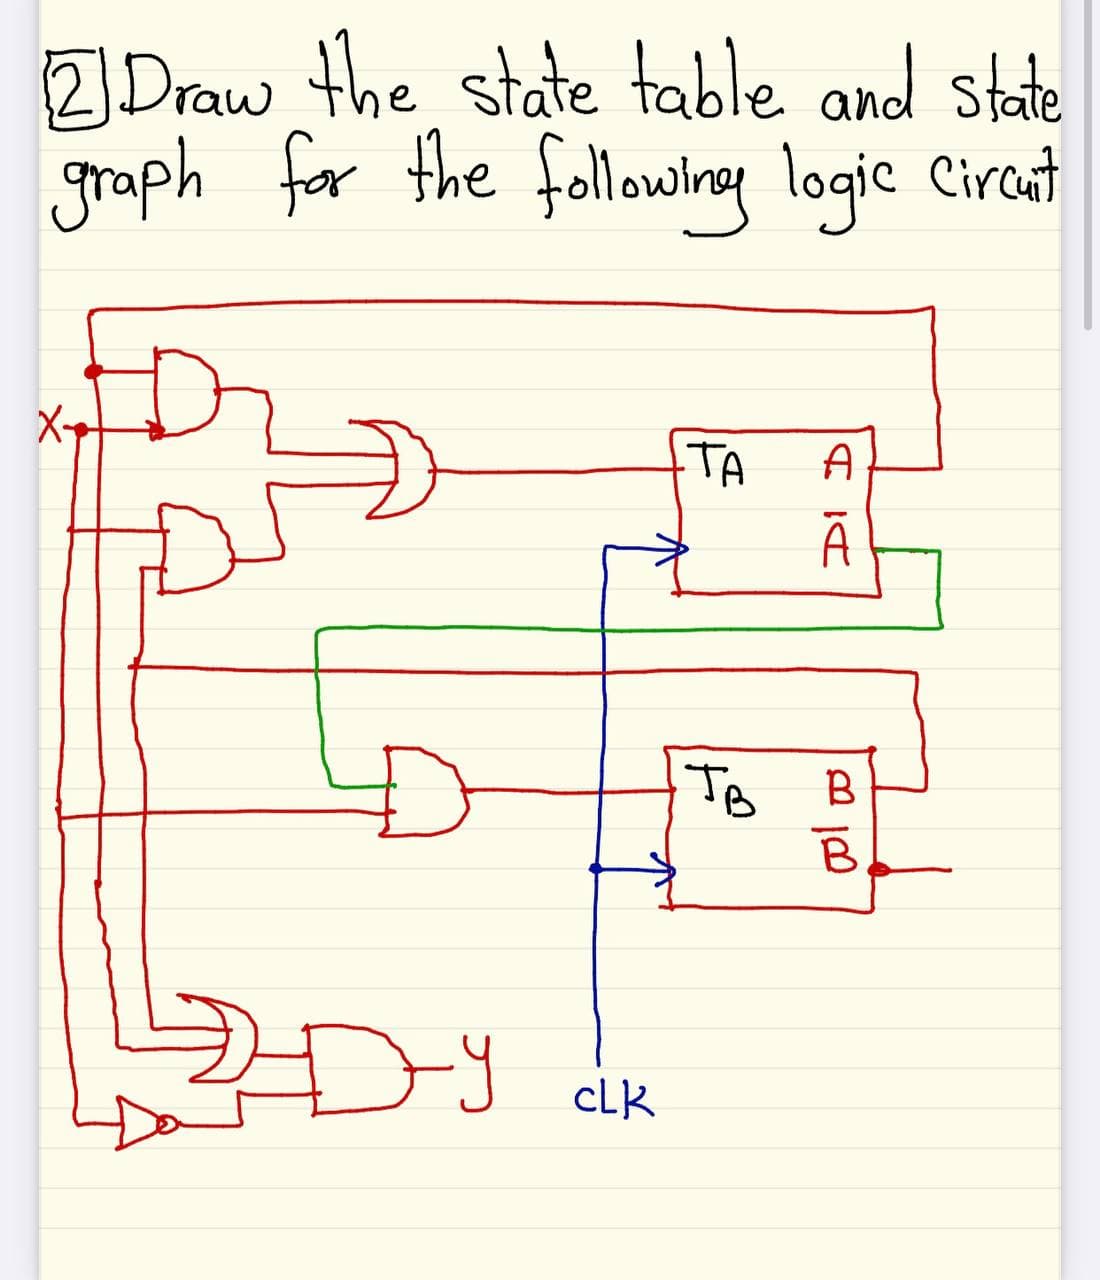 2 Draw the state table and state
graph for the followineg logic Cirat
X-
TA
A
A
To B
cLk
